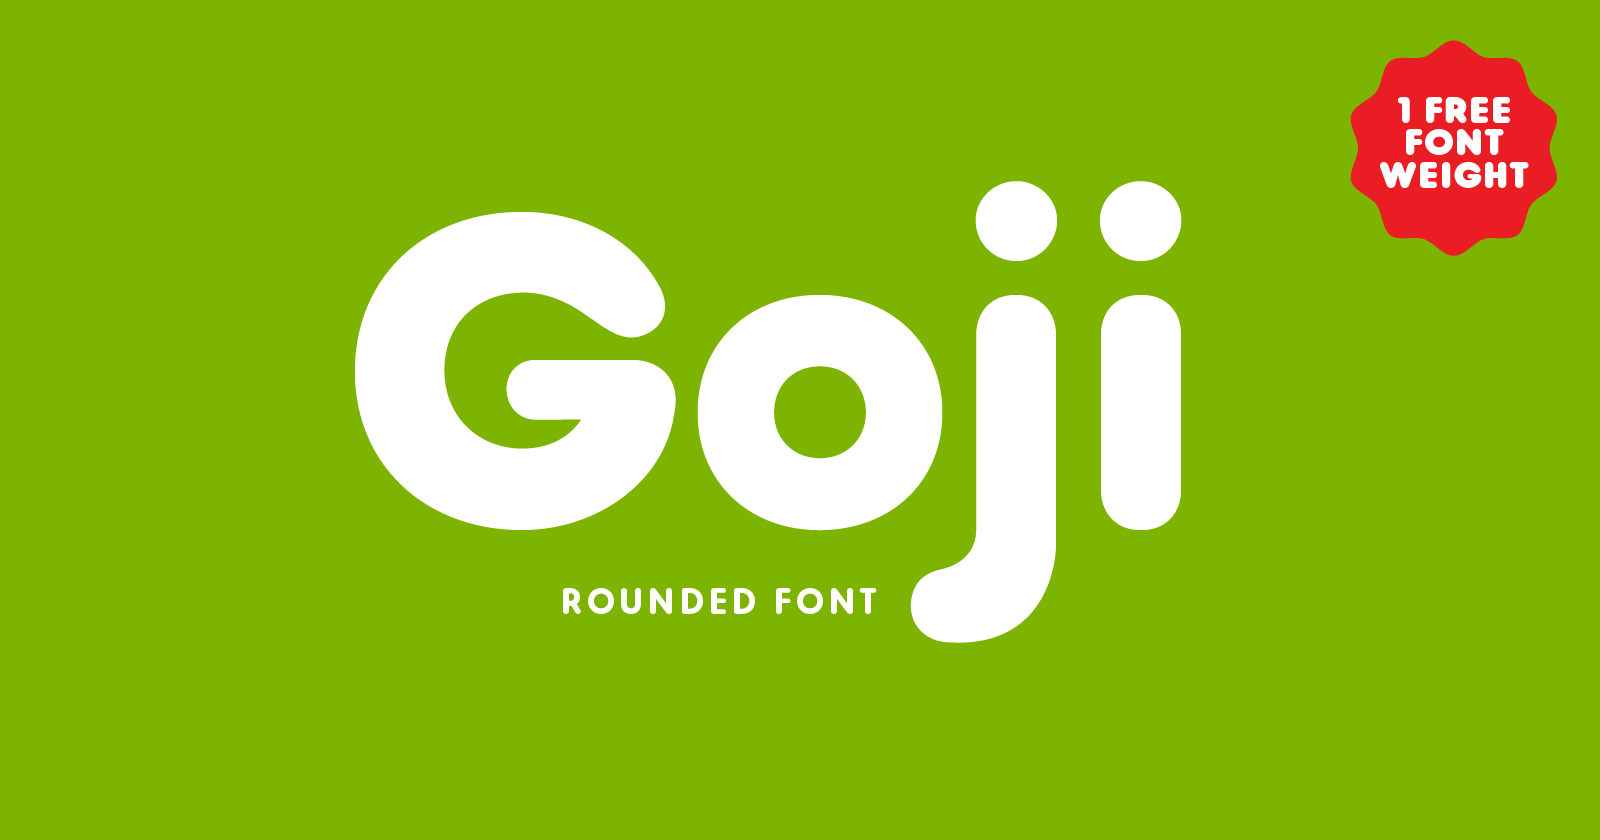 Rounded bubble font Goji